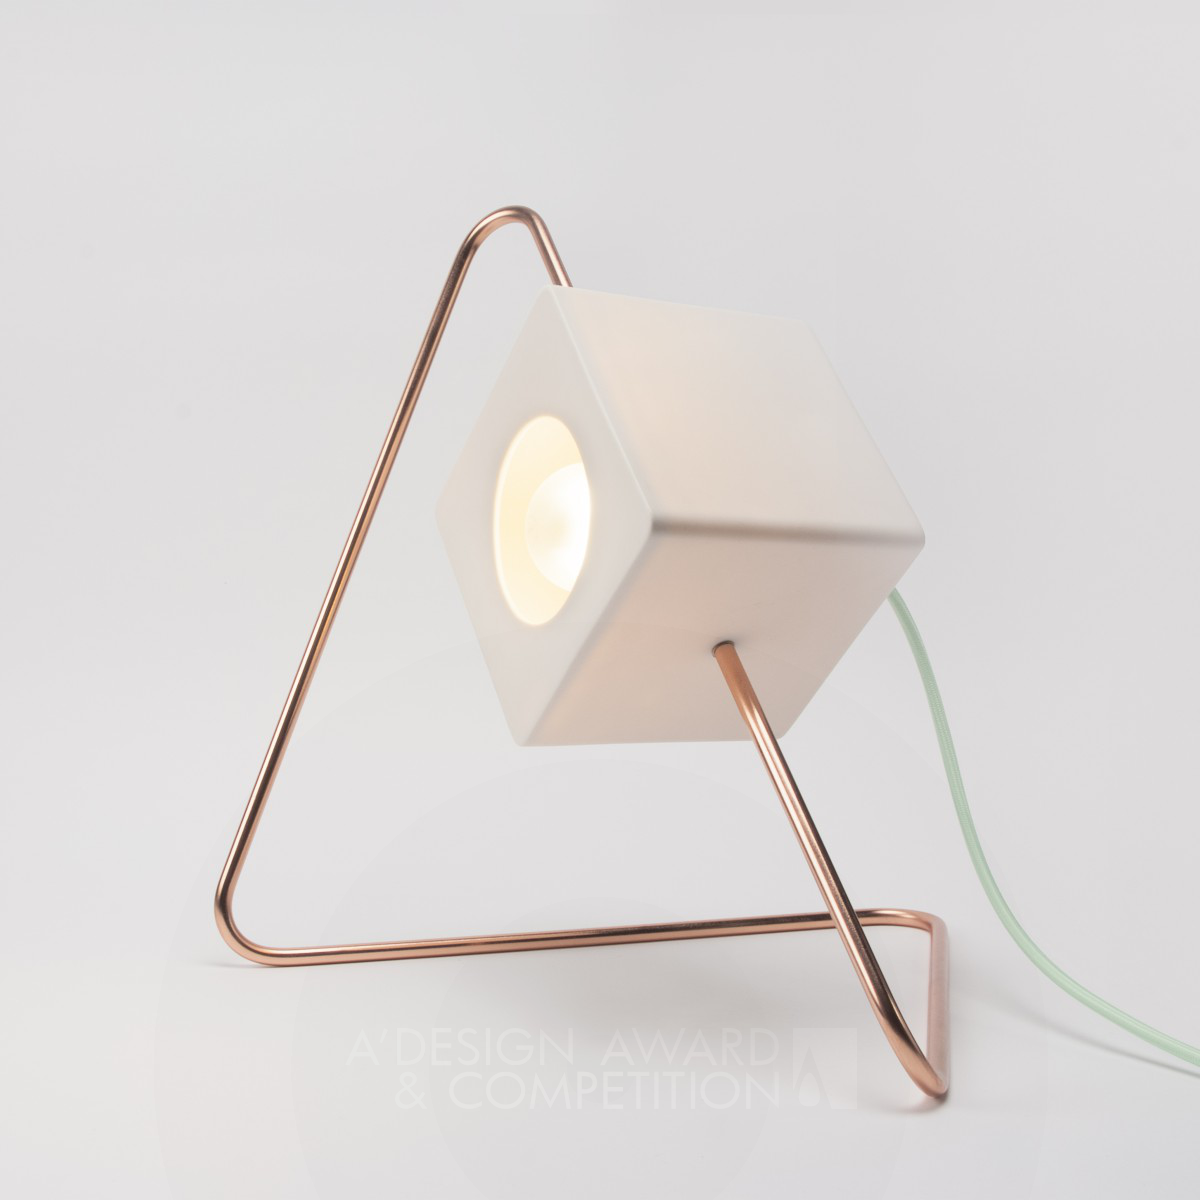 Focal Point Lamp by Chifen Cheng